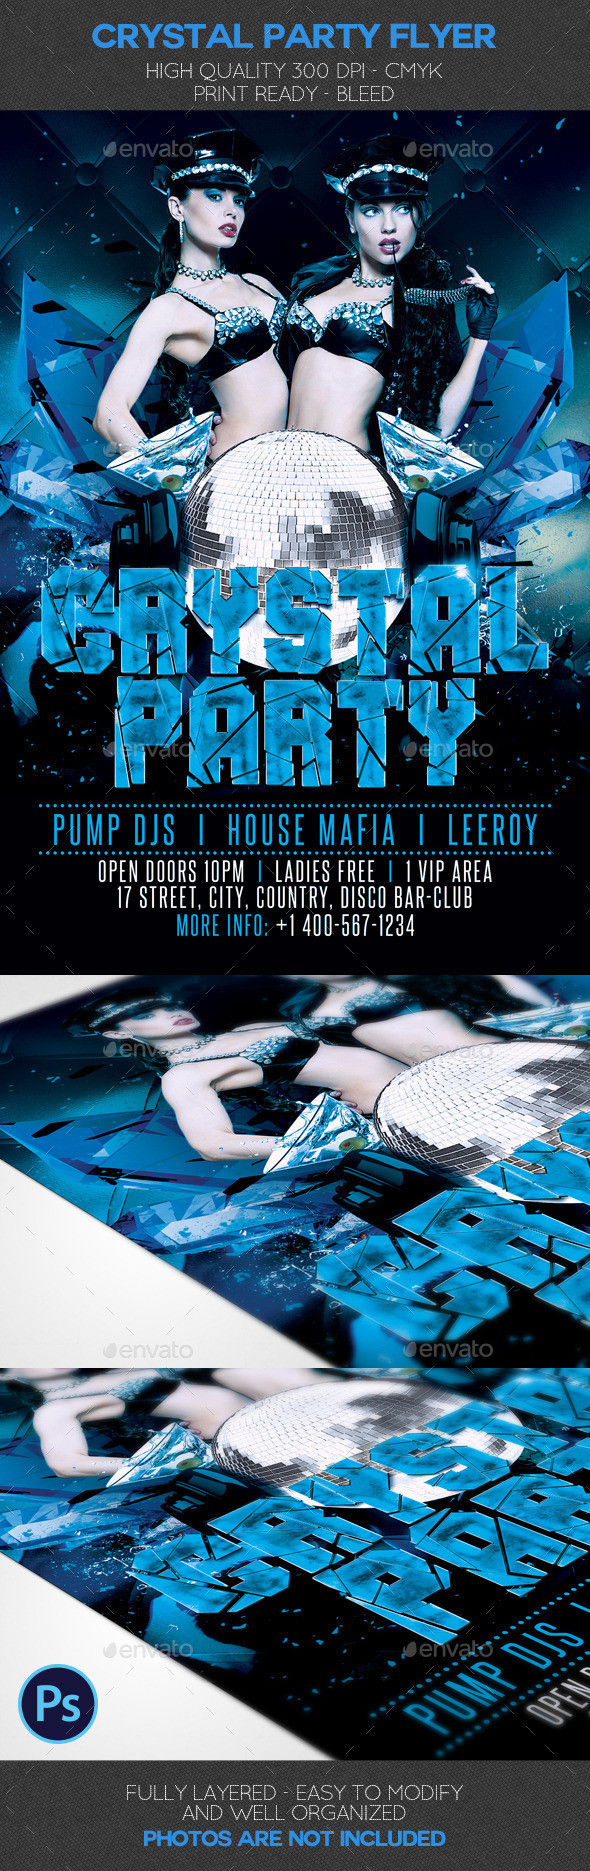 Crystal party flyer template preview